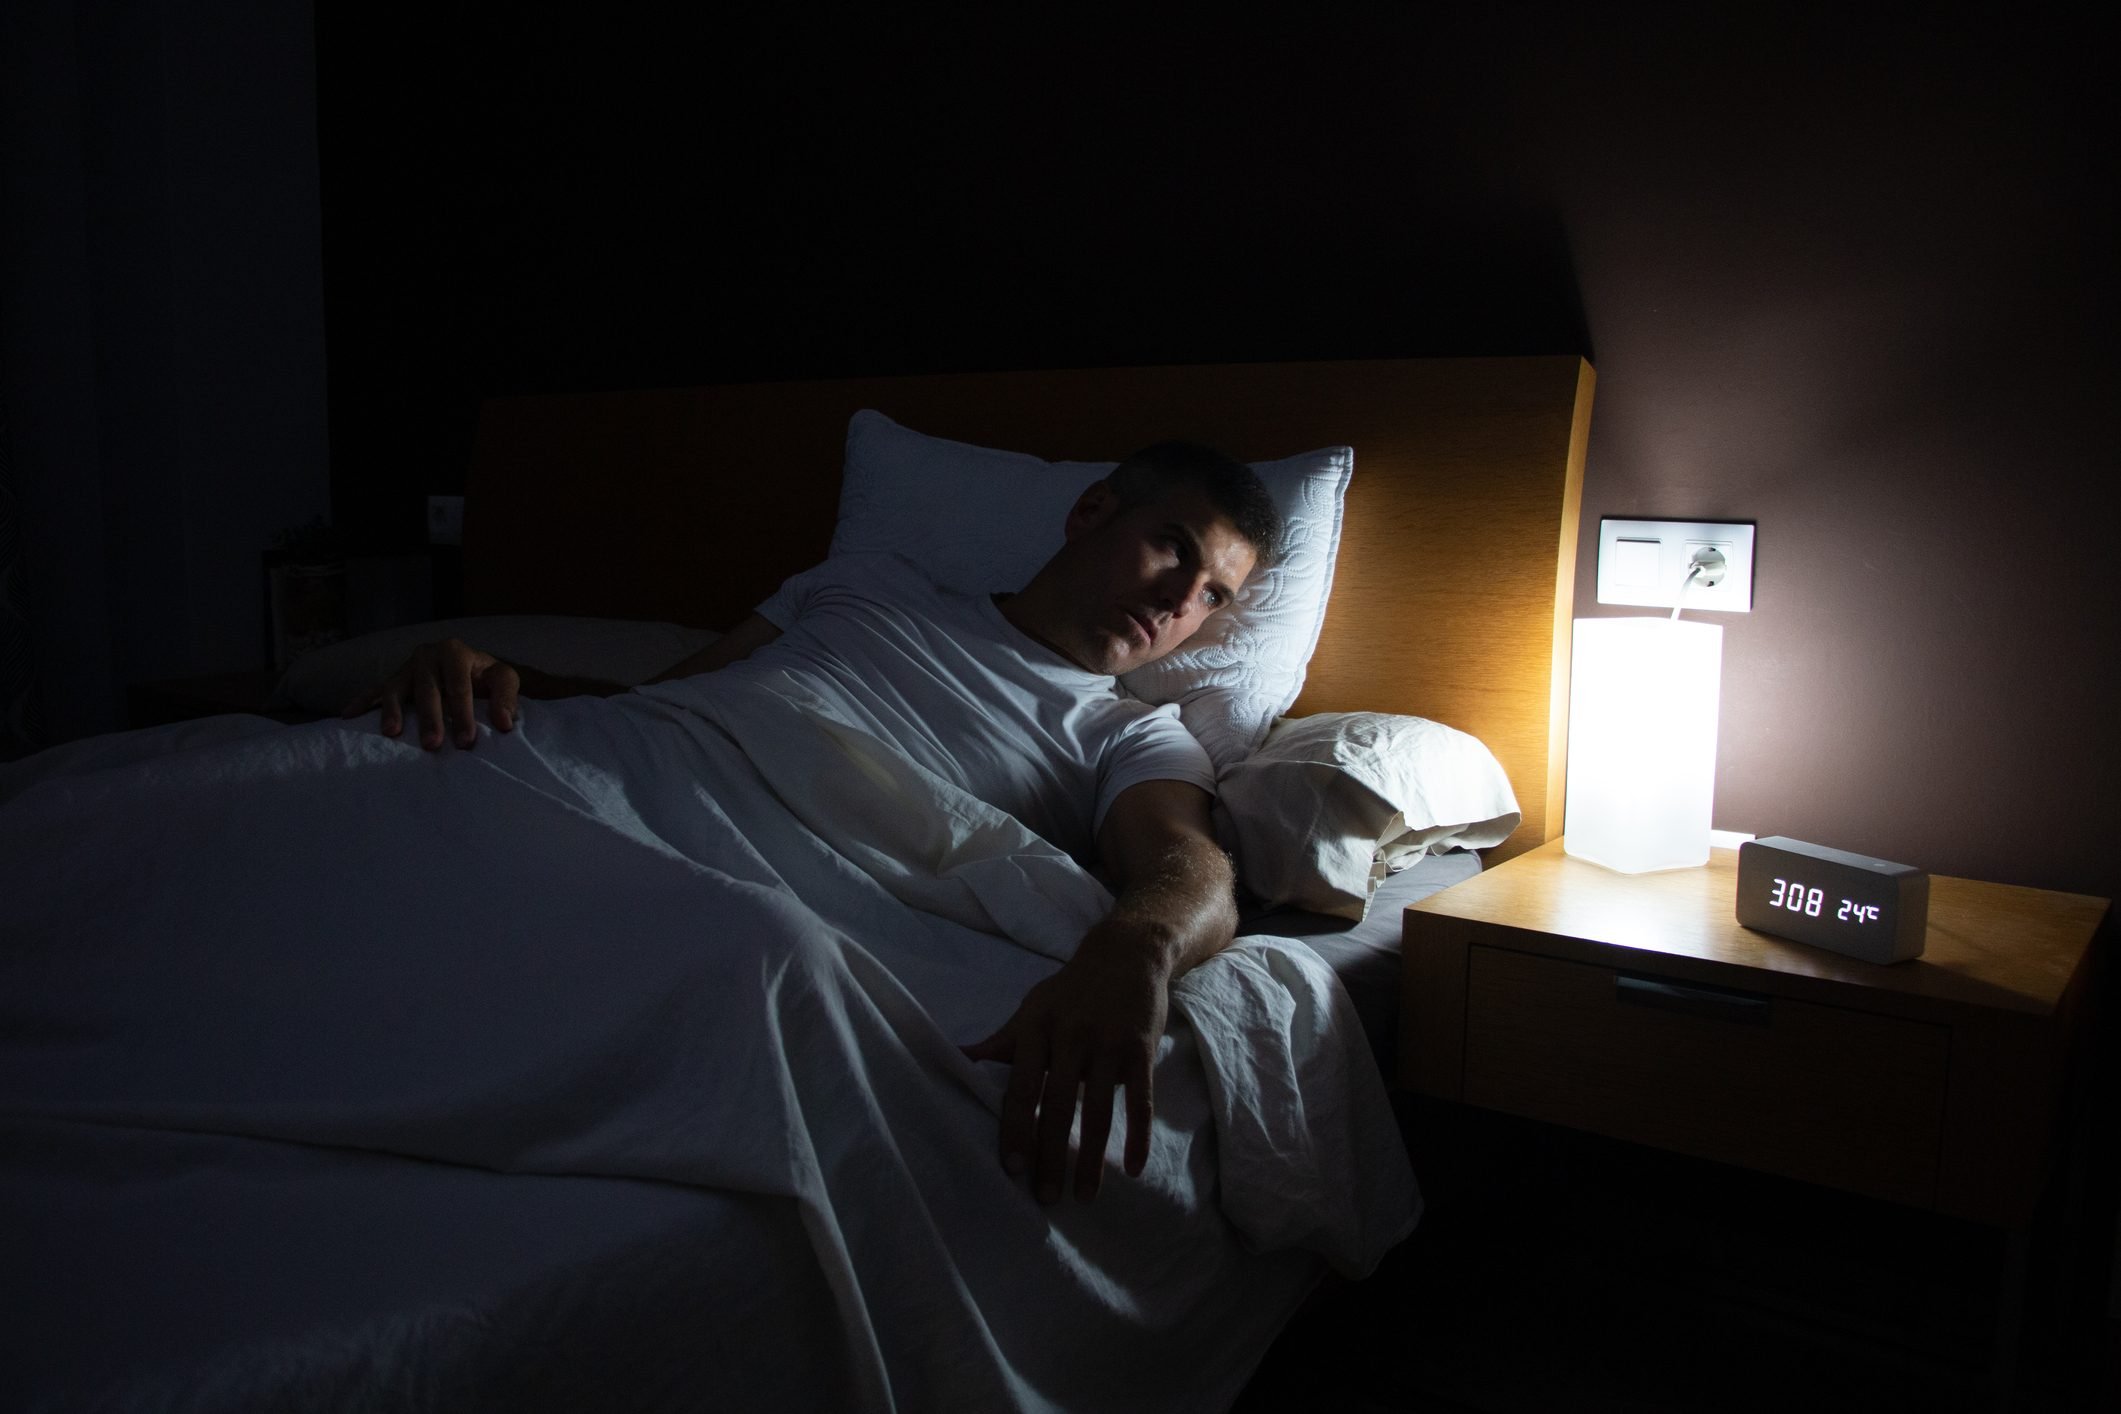 Waking Up With Anxiety at Night? Here's What Experts Recommend